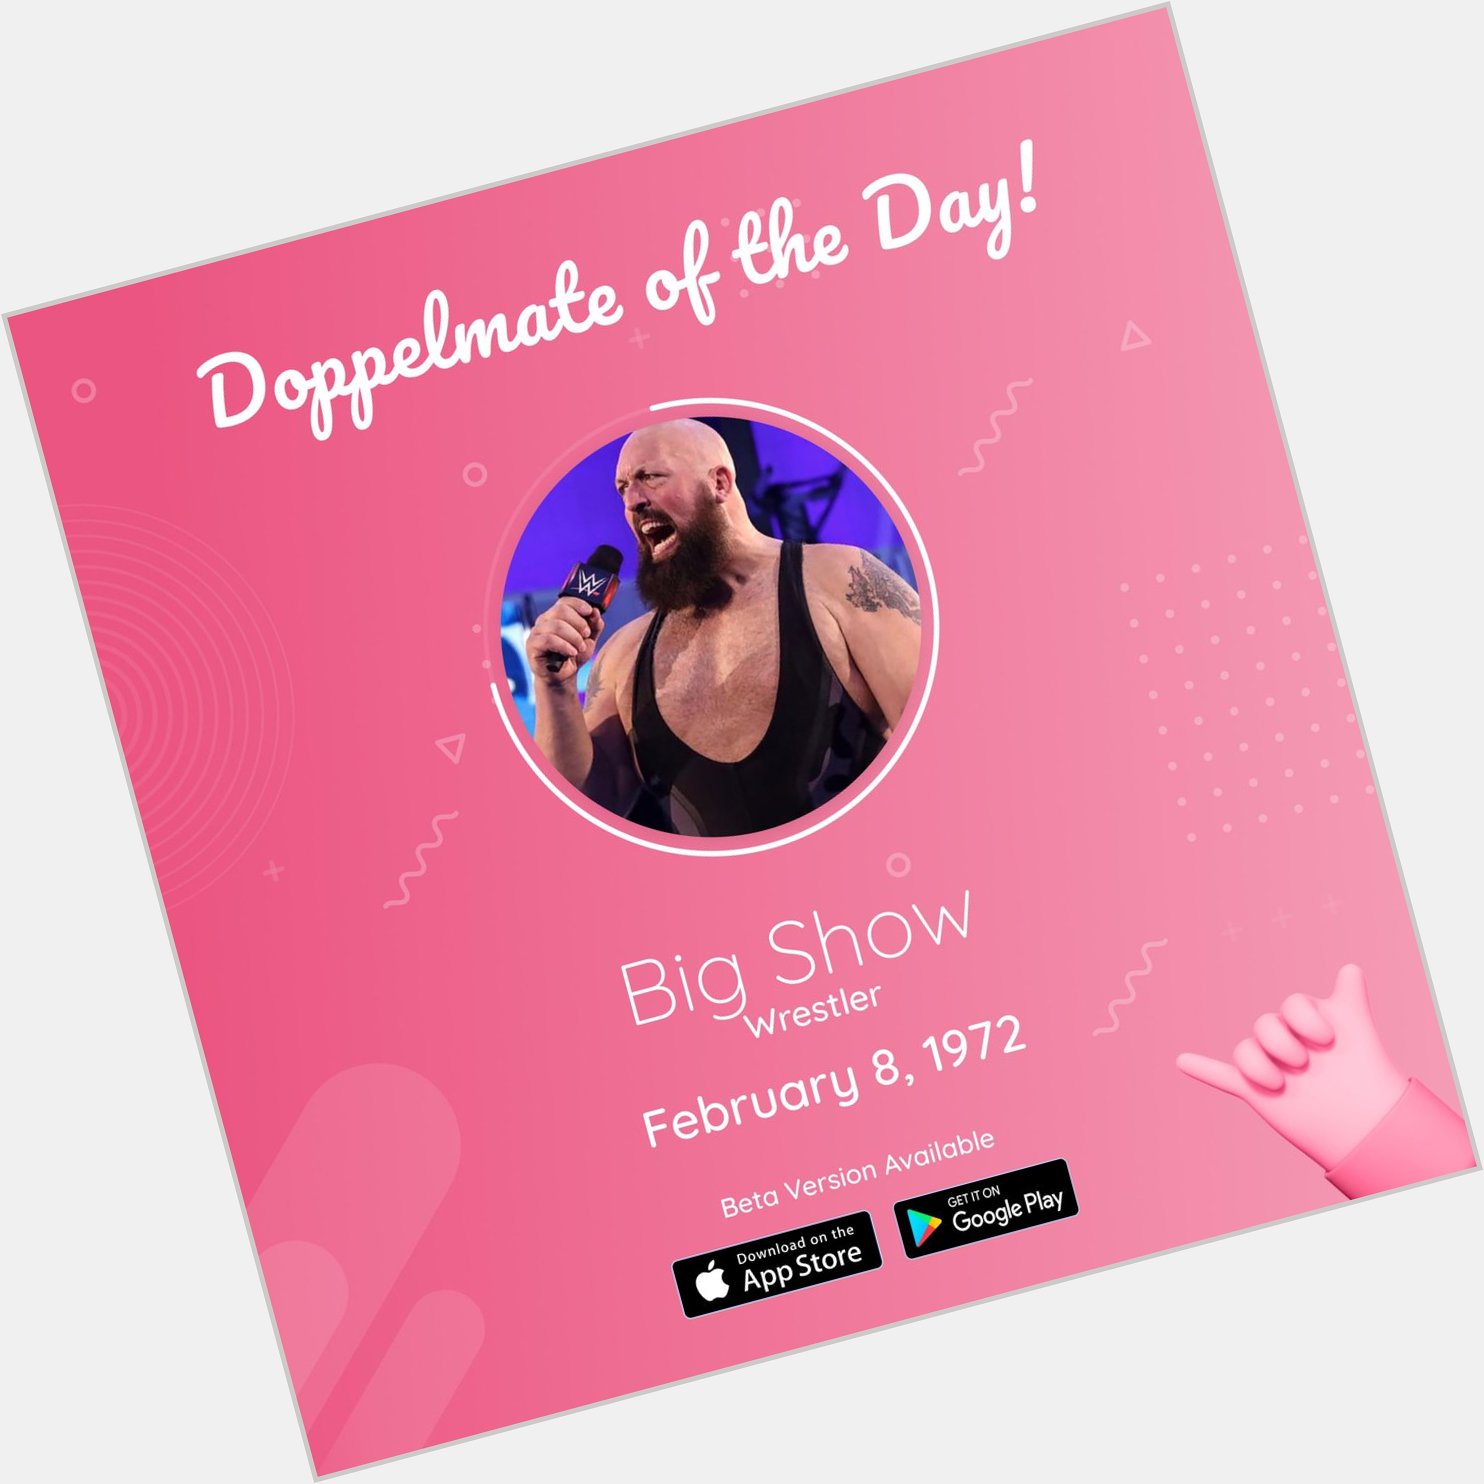 Happy Birthday, Big Show Visit our website to try the Beta App!     